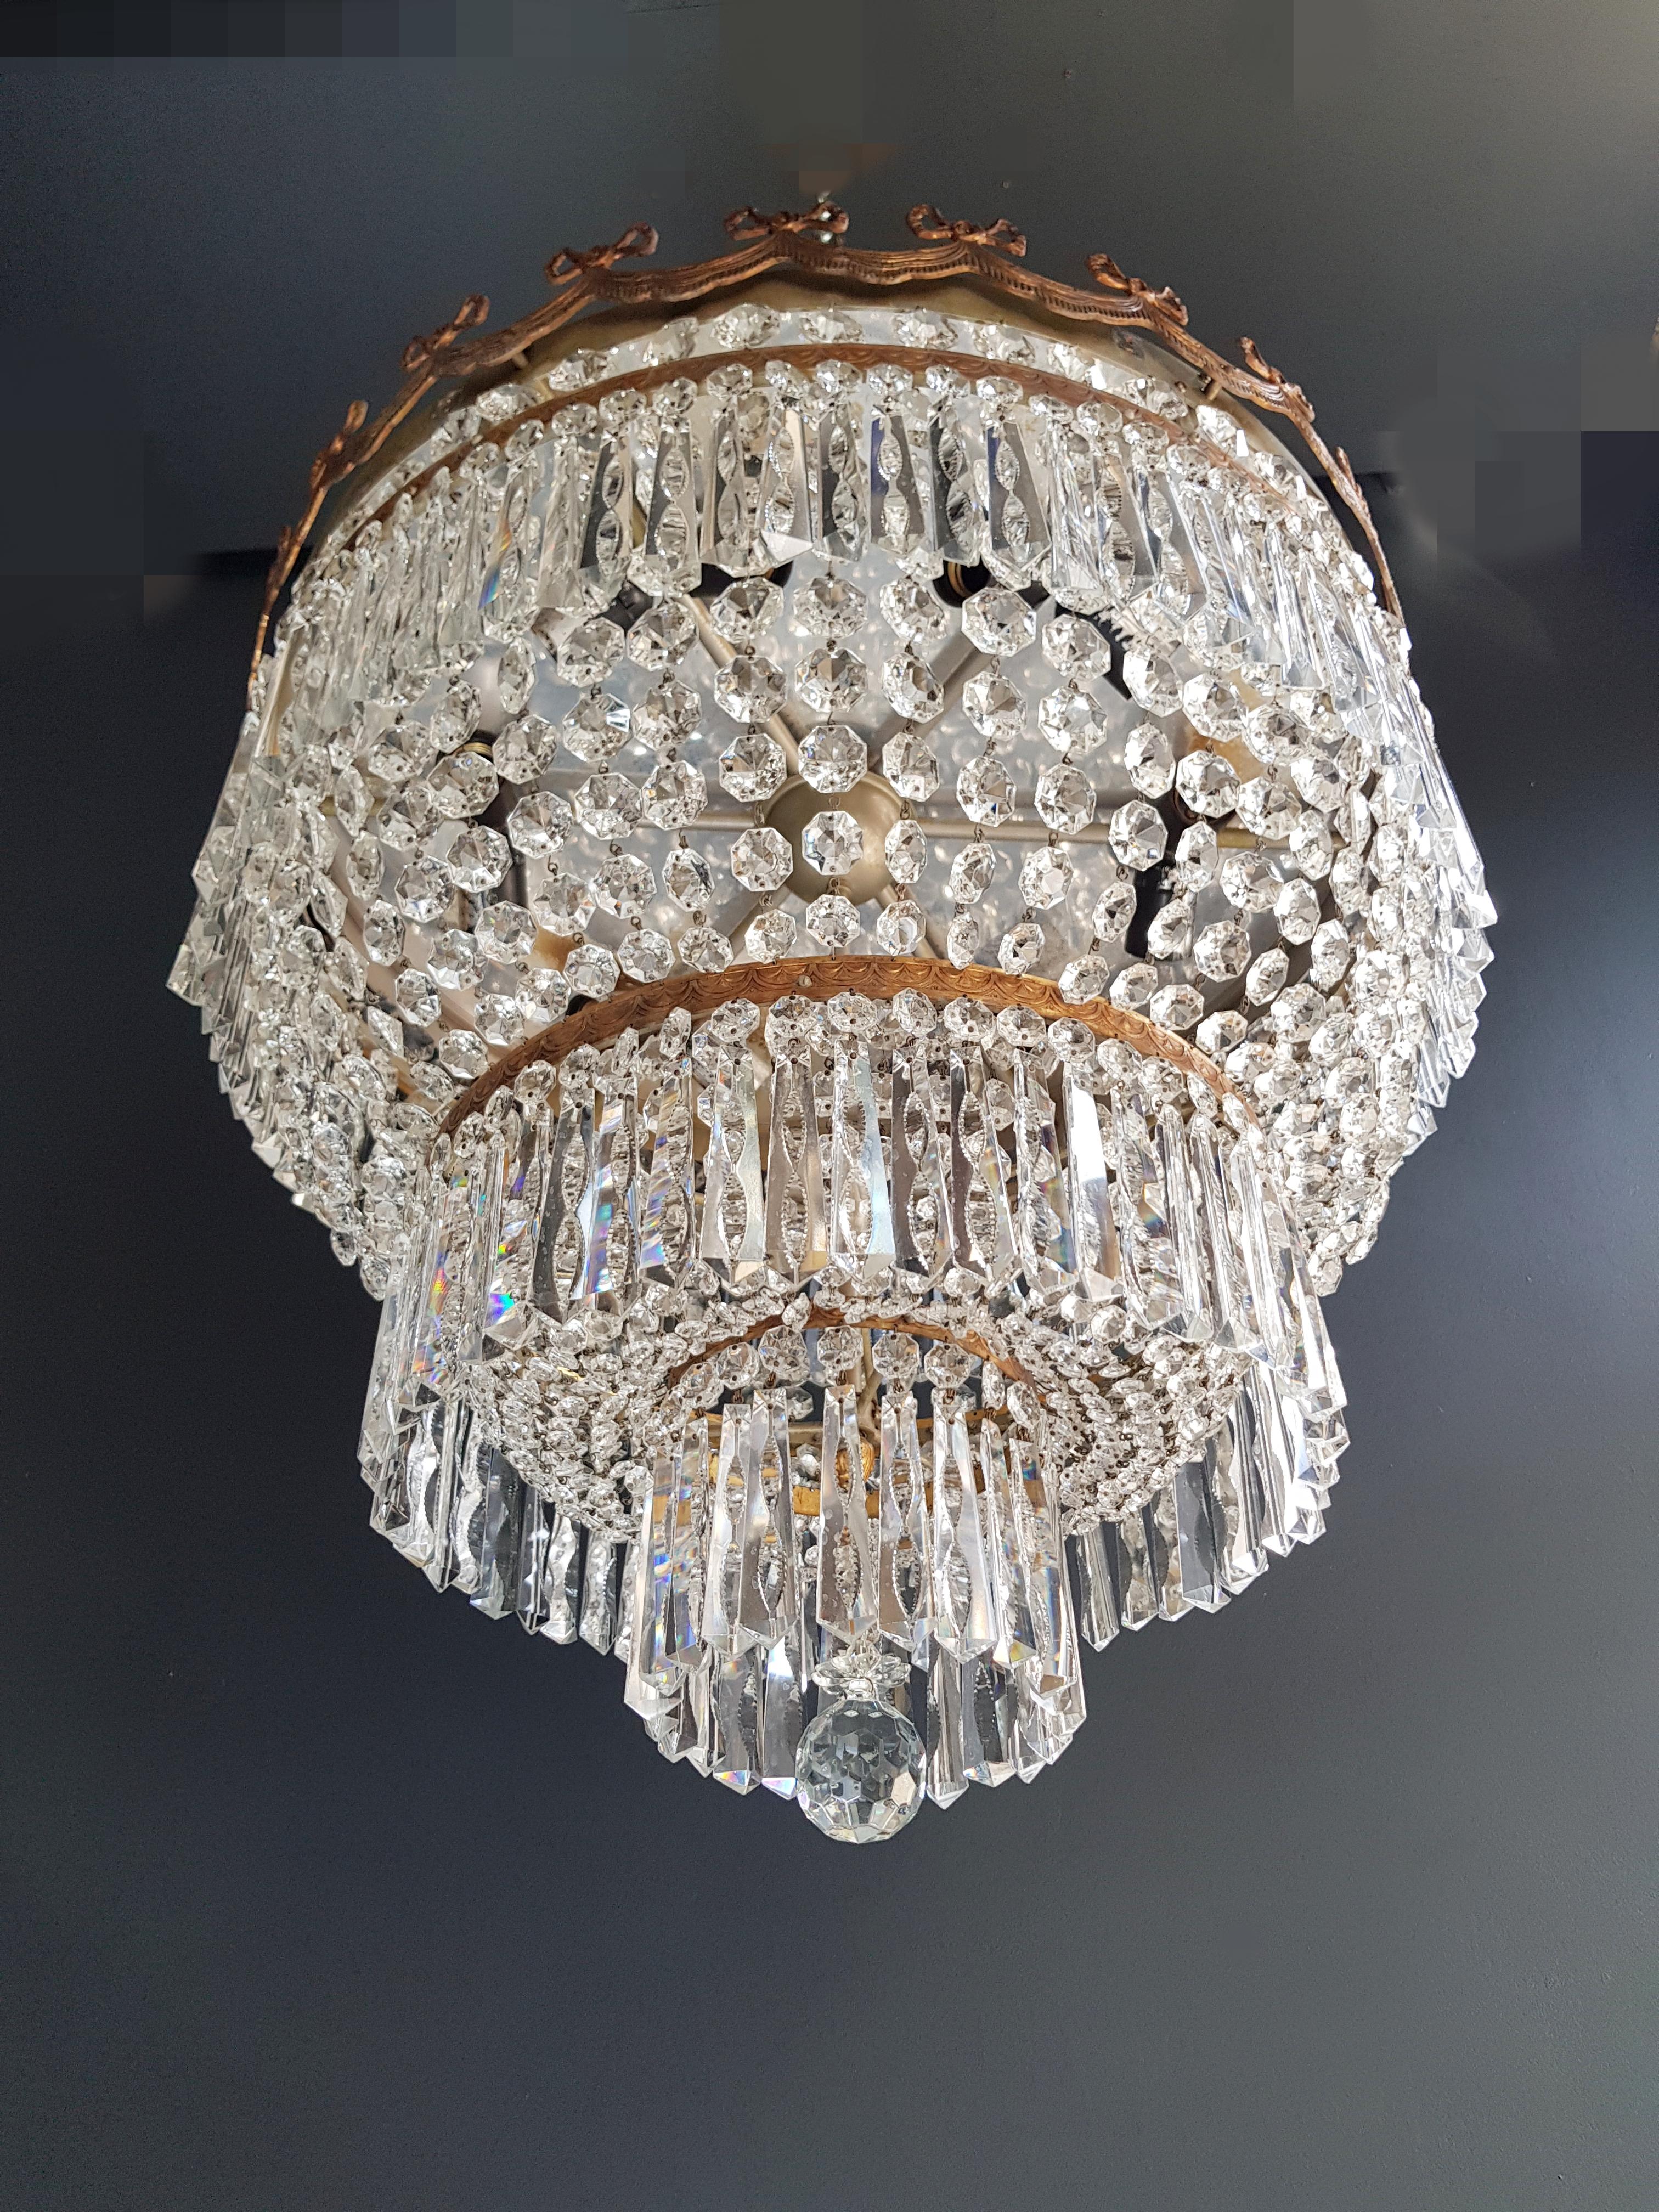 Low ceiling crystal chandelier brass.
Cabling completely renewed. Crystal hand knotted.
Measures: Total height 70 cm, height without chain 65 cm, diameter 60 cm. weight (approximately) 15kg.

Number of lights: 12-light bulb sockets: E27
Brass